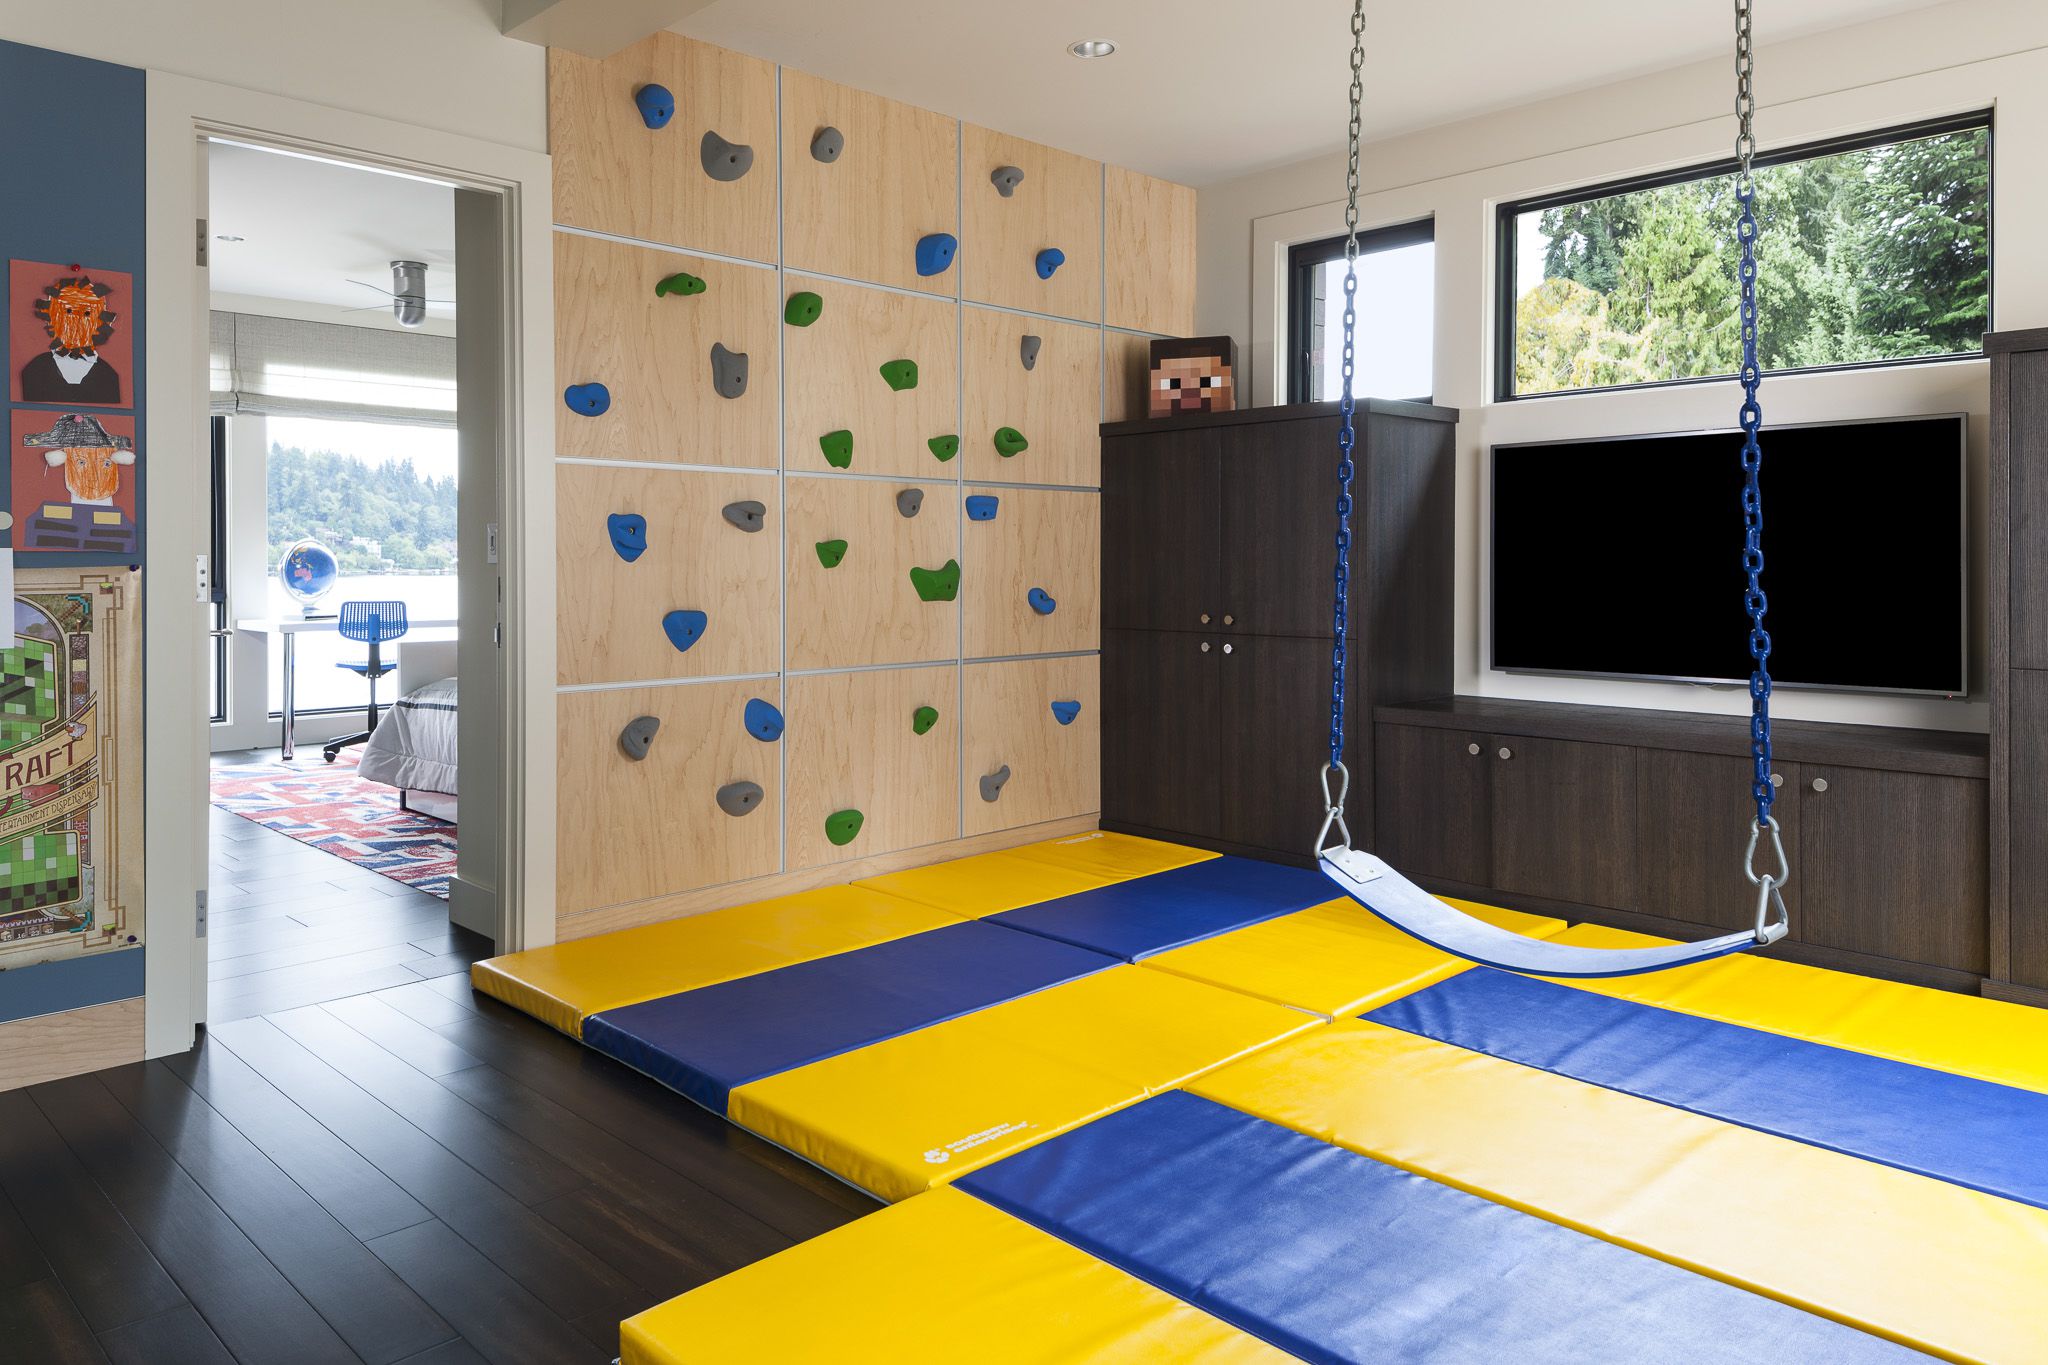 A playroom contributes fun functionality in this custom family home.